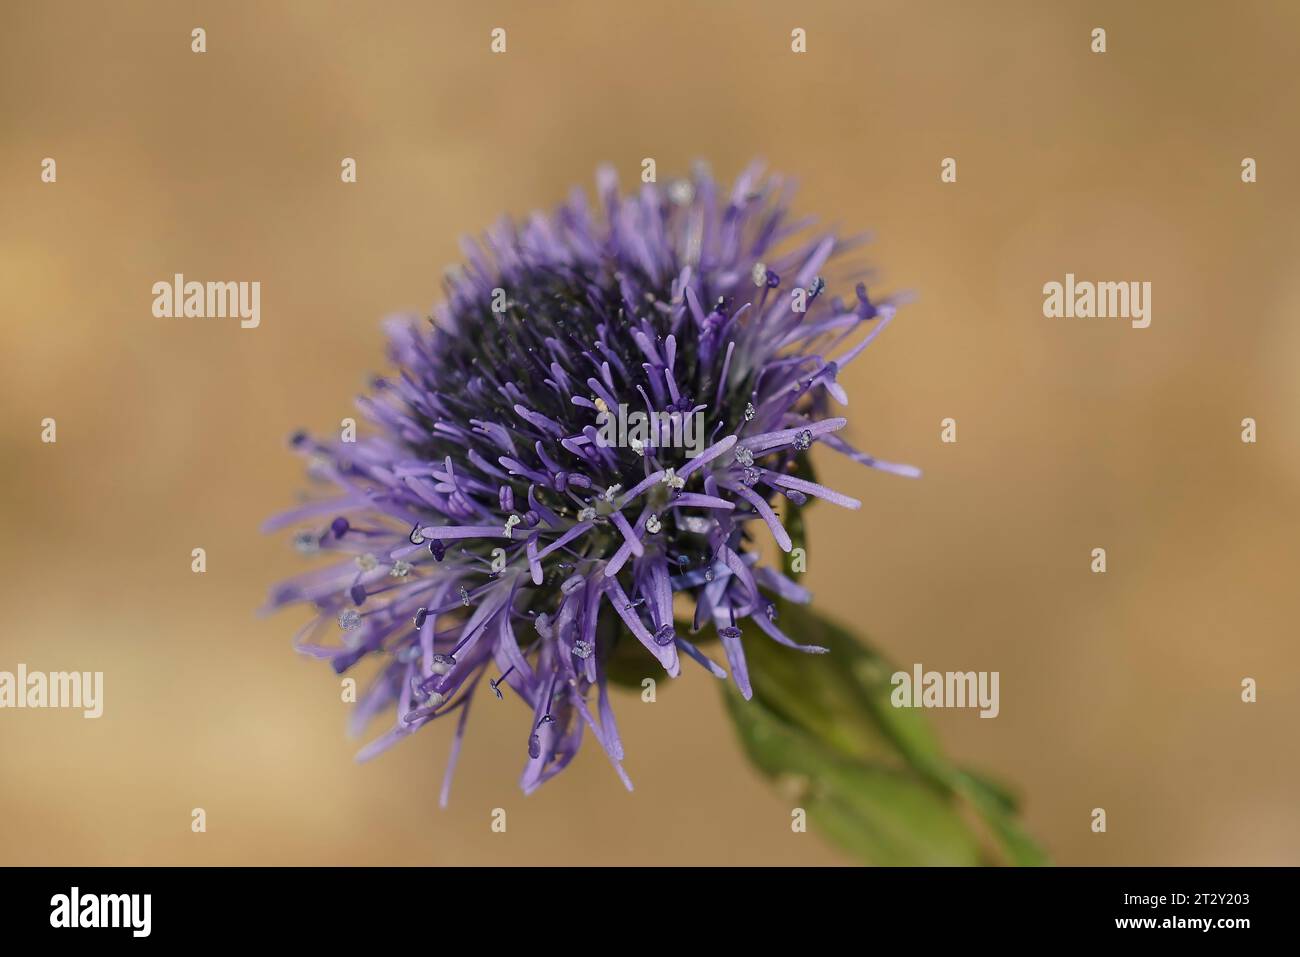 Natural closeup on the blue flower of the Common globularia Globularia vulgaris against a brown background Stock Photo